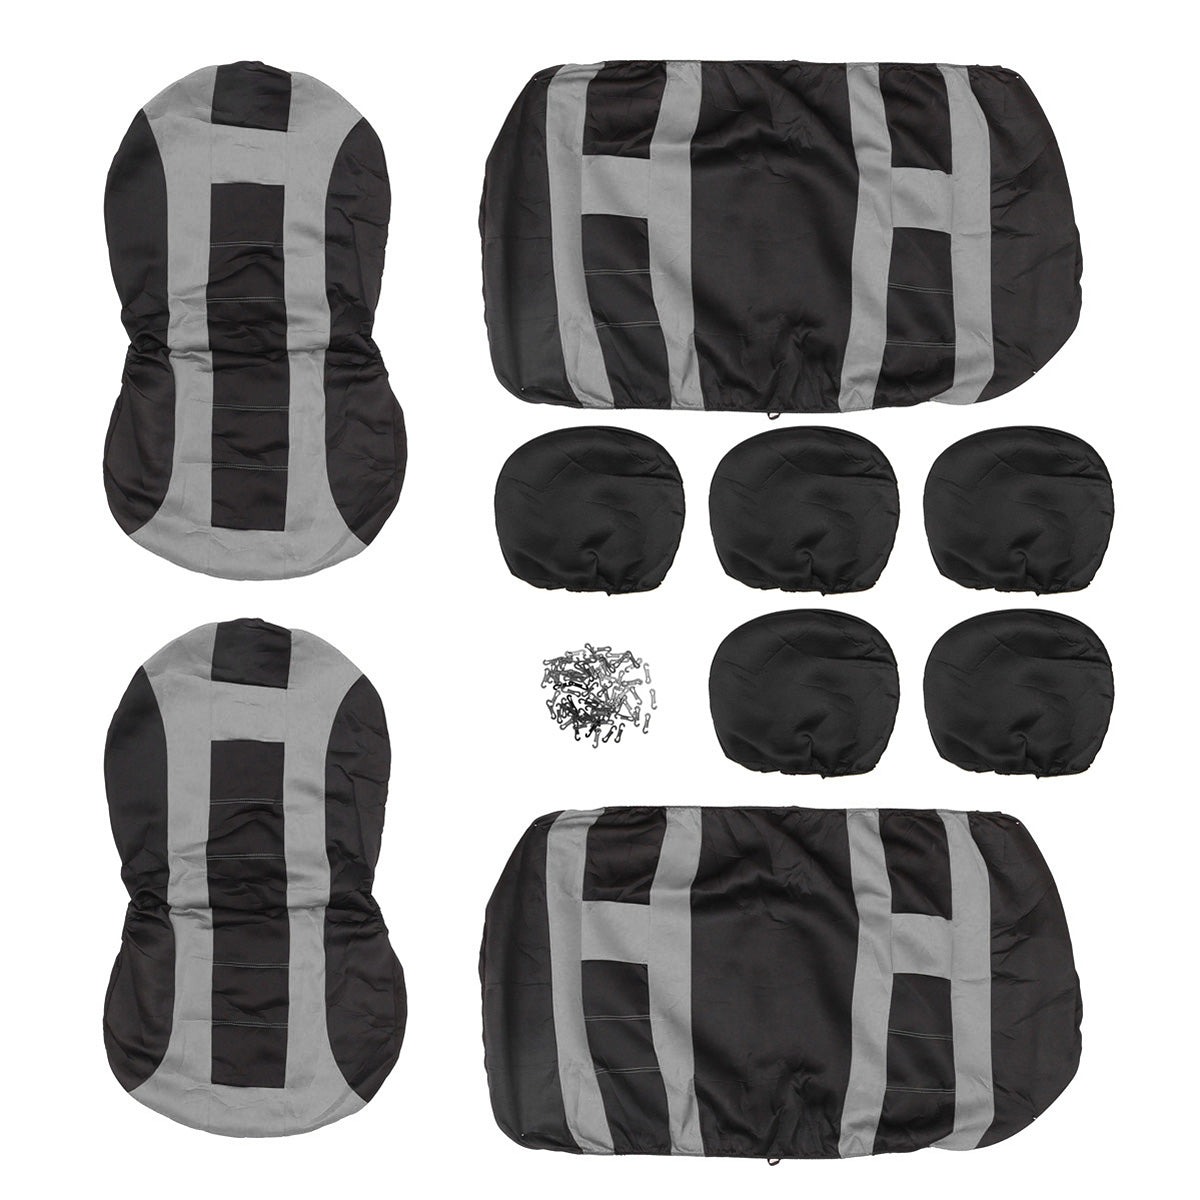 Dark Slate Gray Universal Car Seat Covers Front Rear Protectors 9 Piece Set Washable Grey&Black